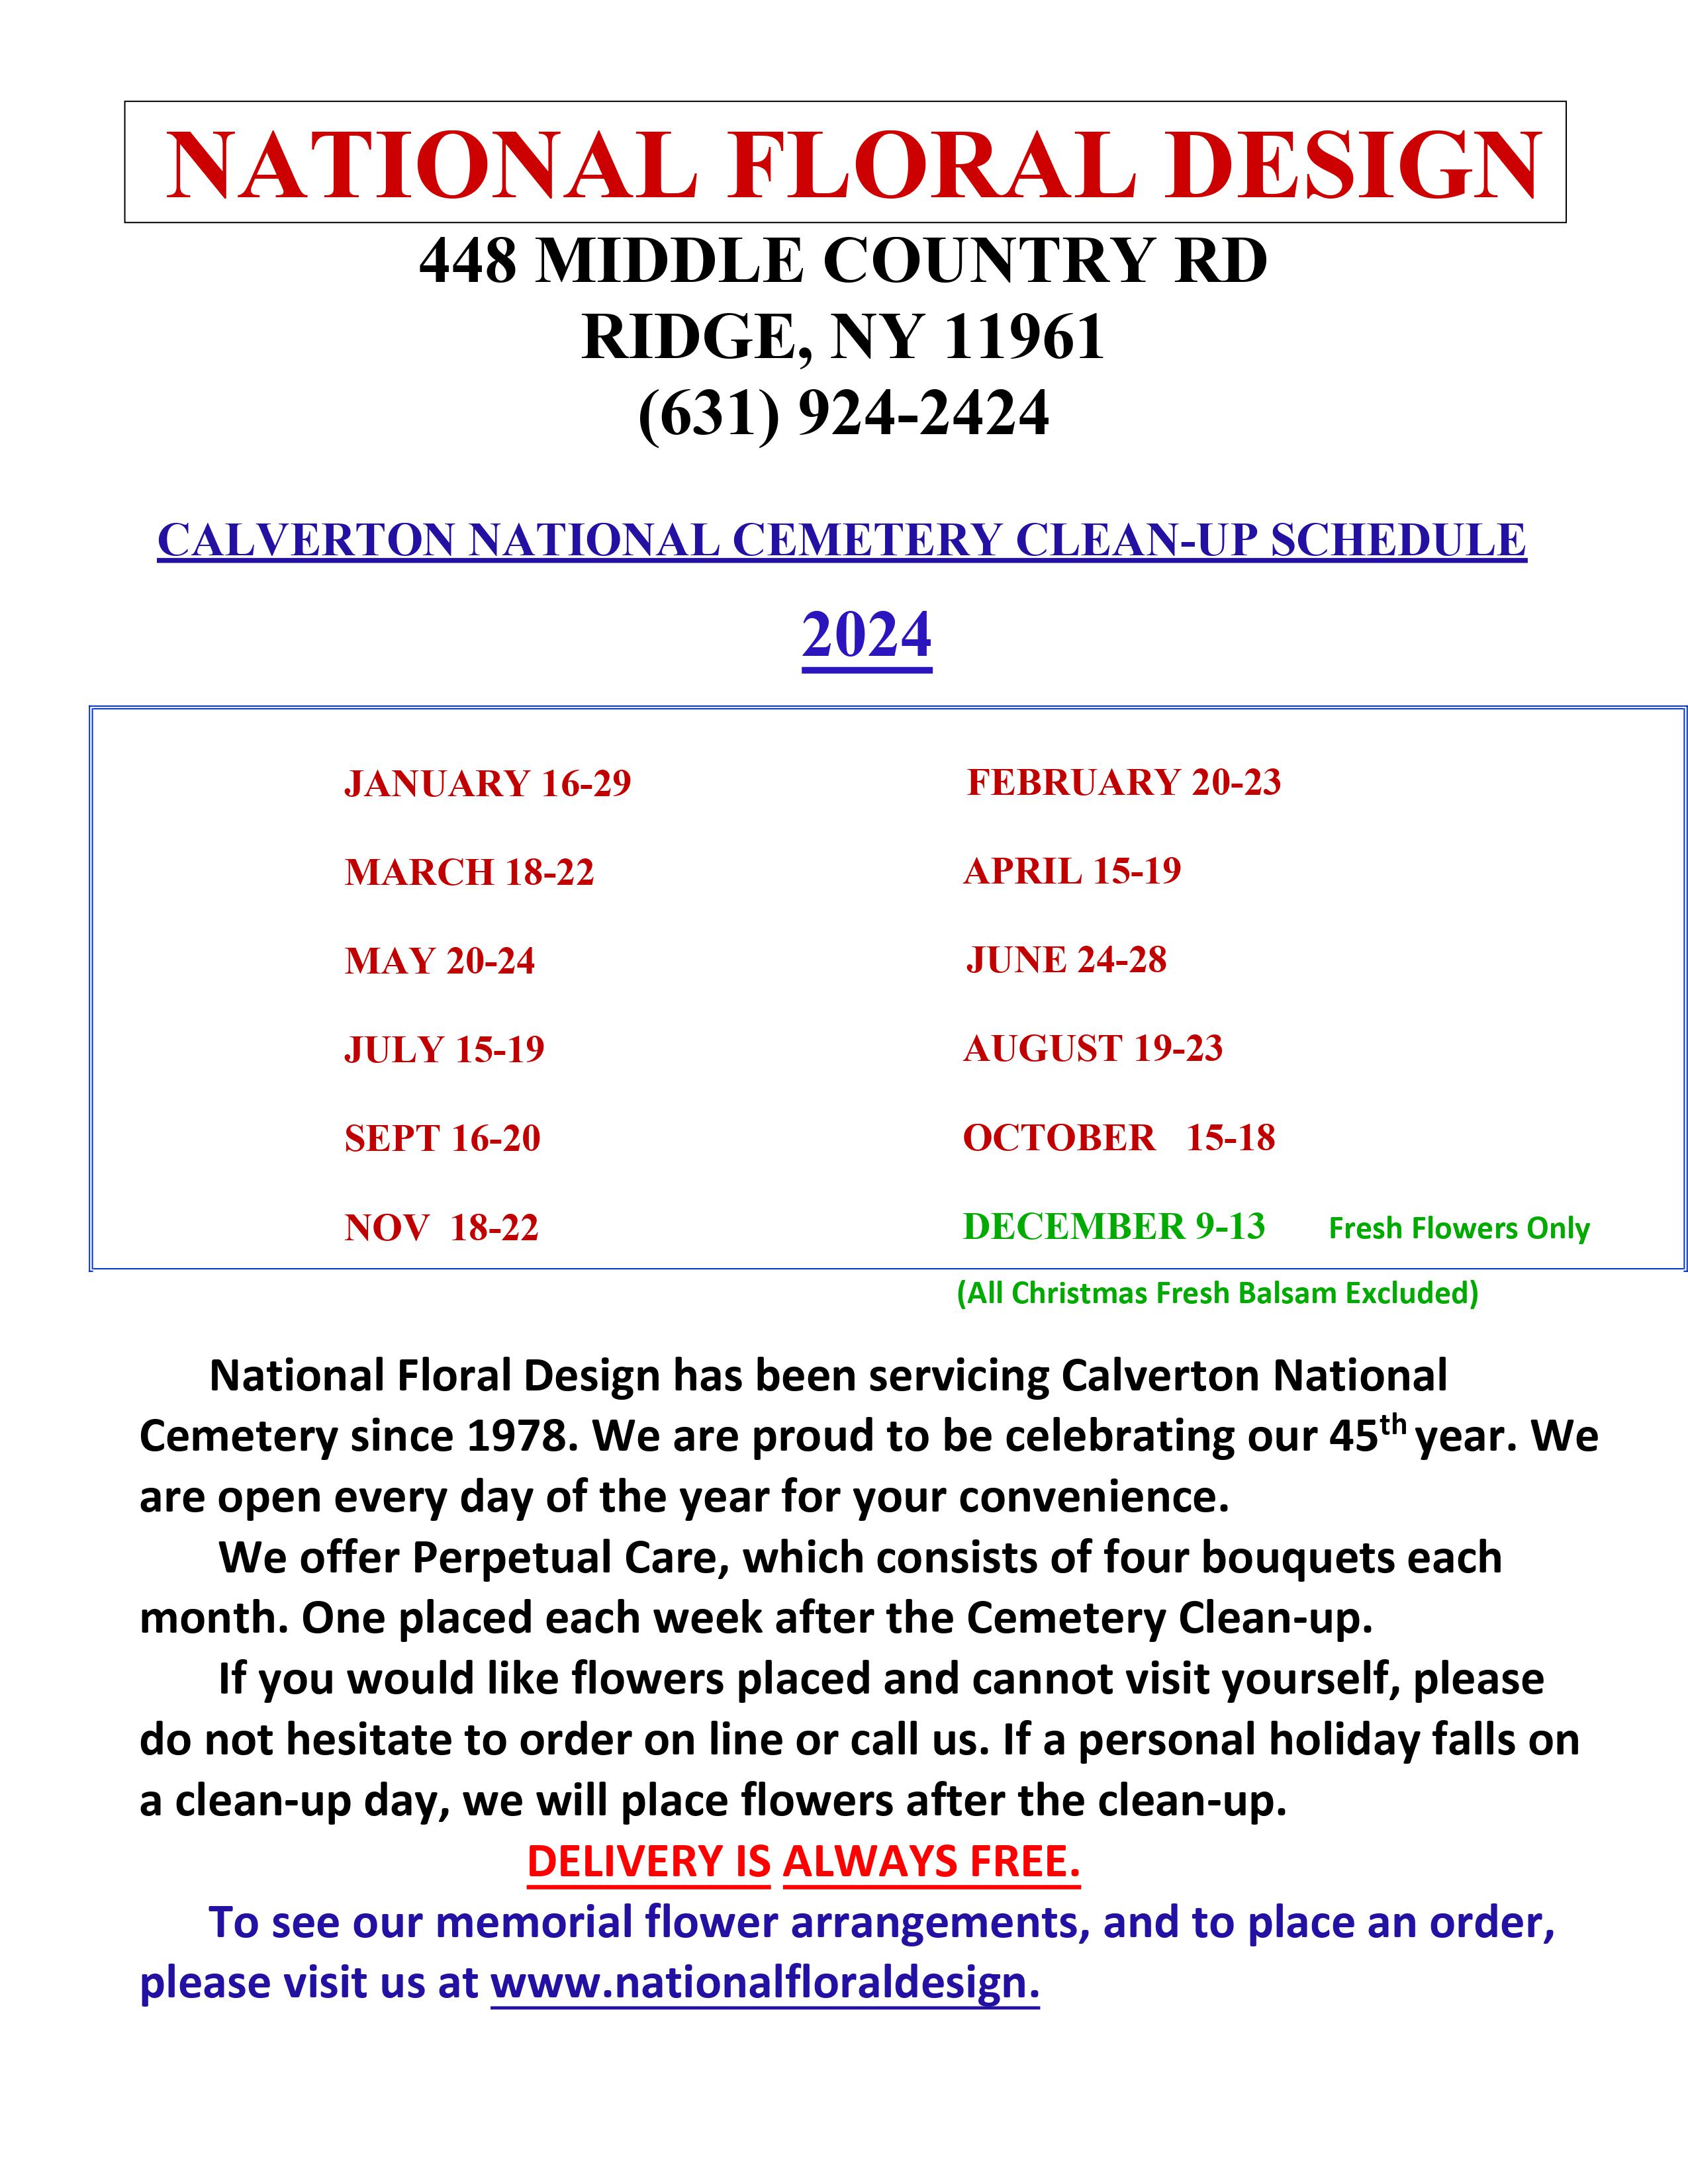 CEMETERY CLEAN UP SCHEDULE 2024